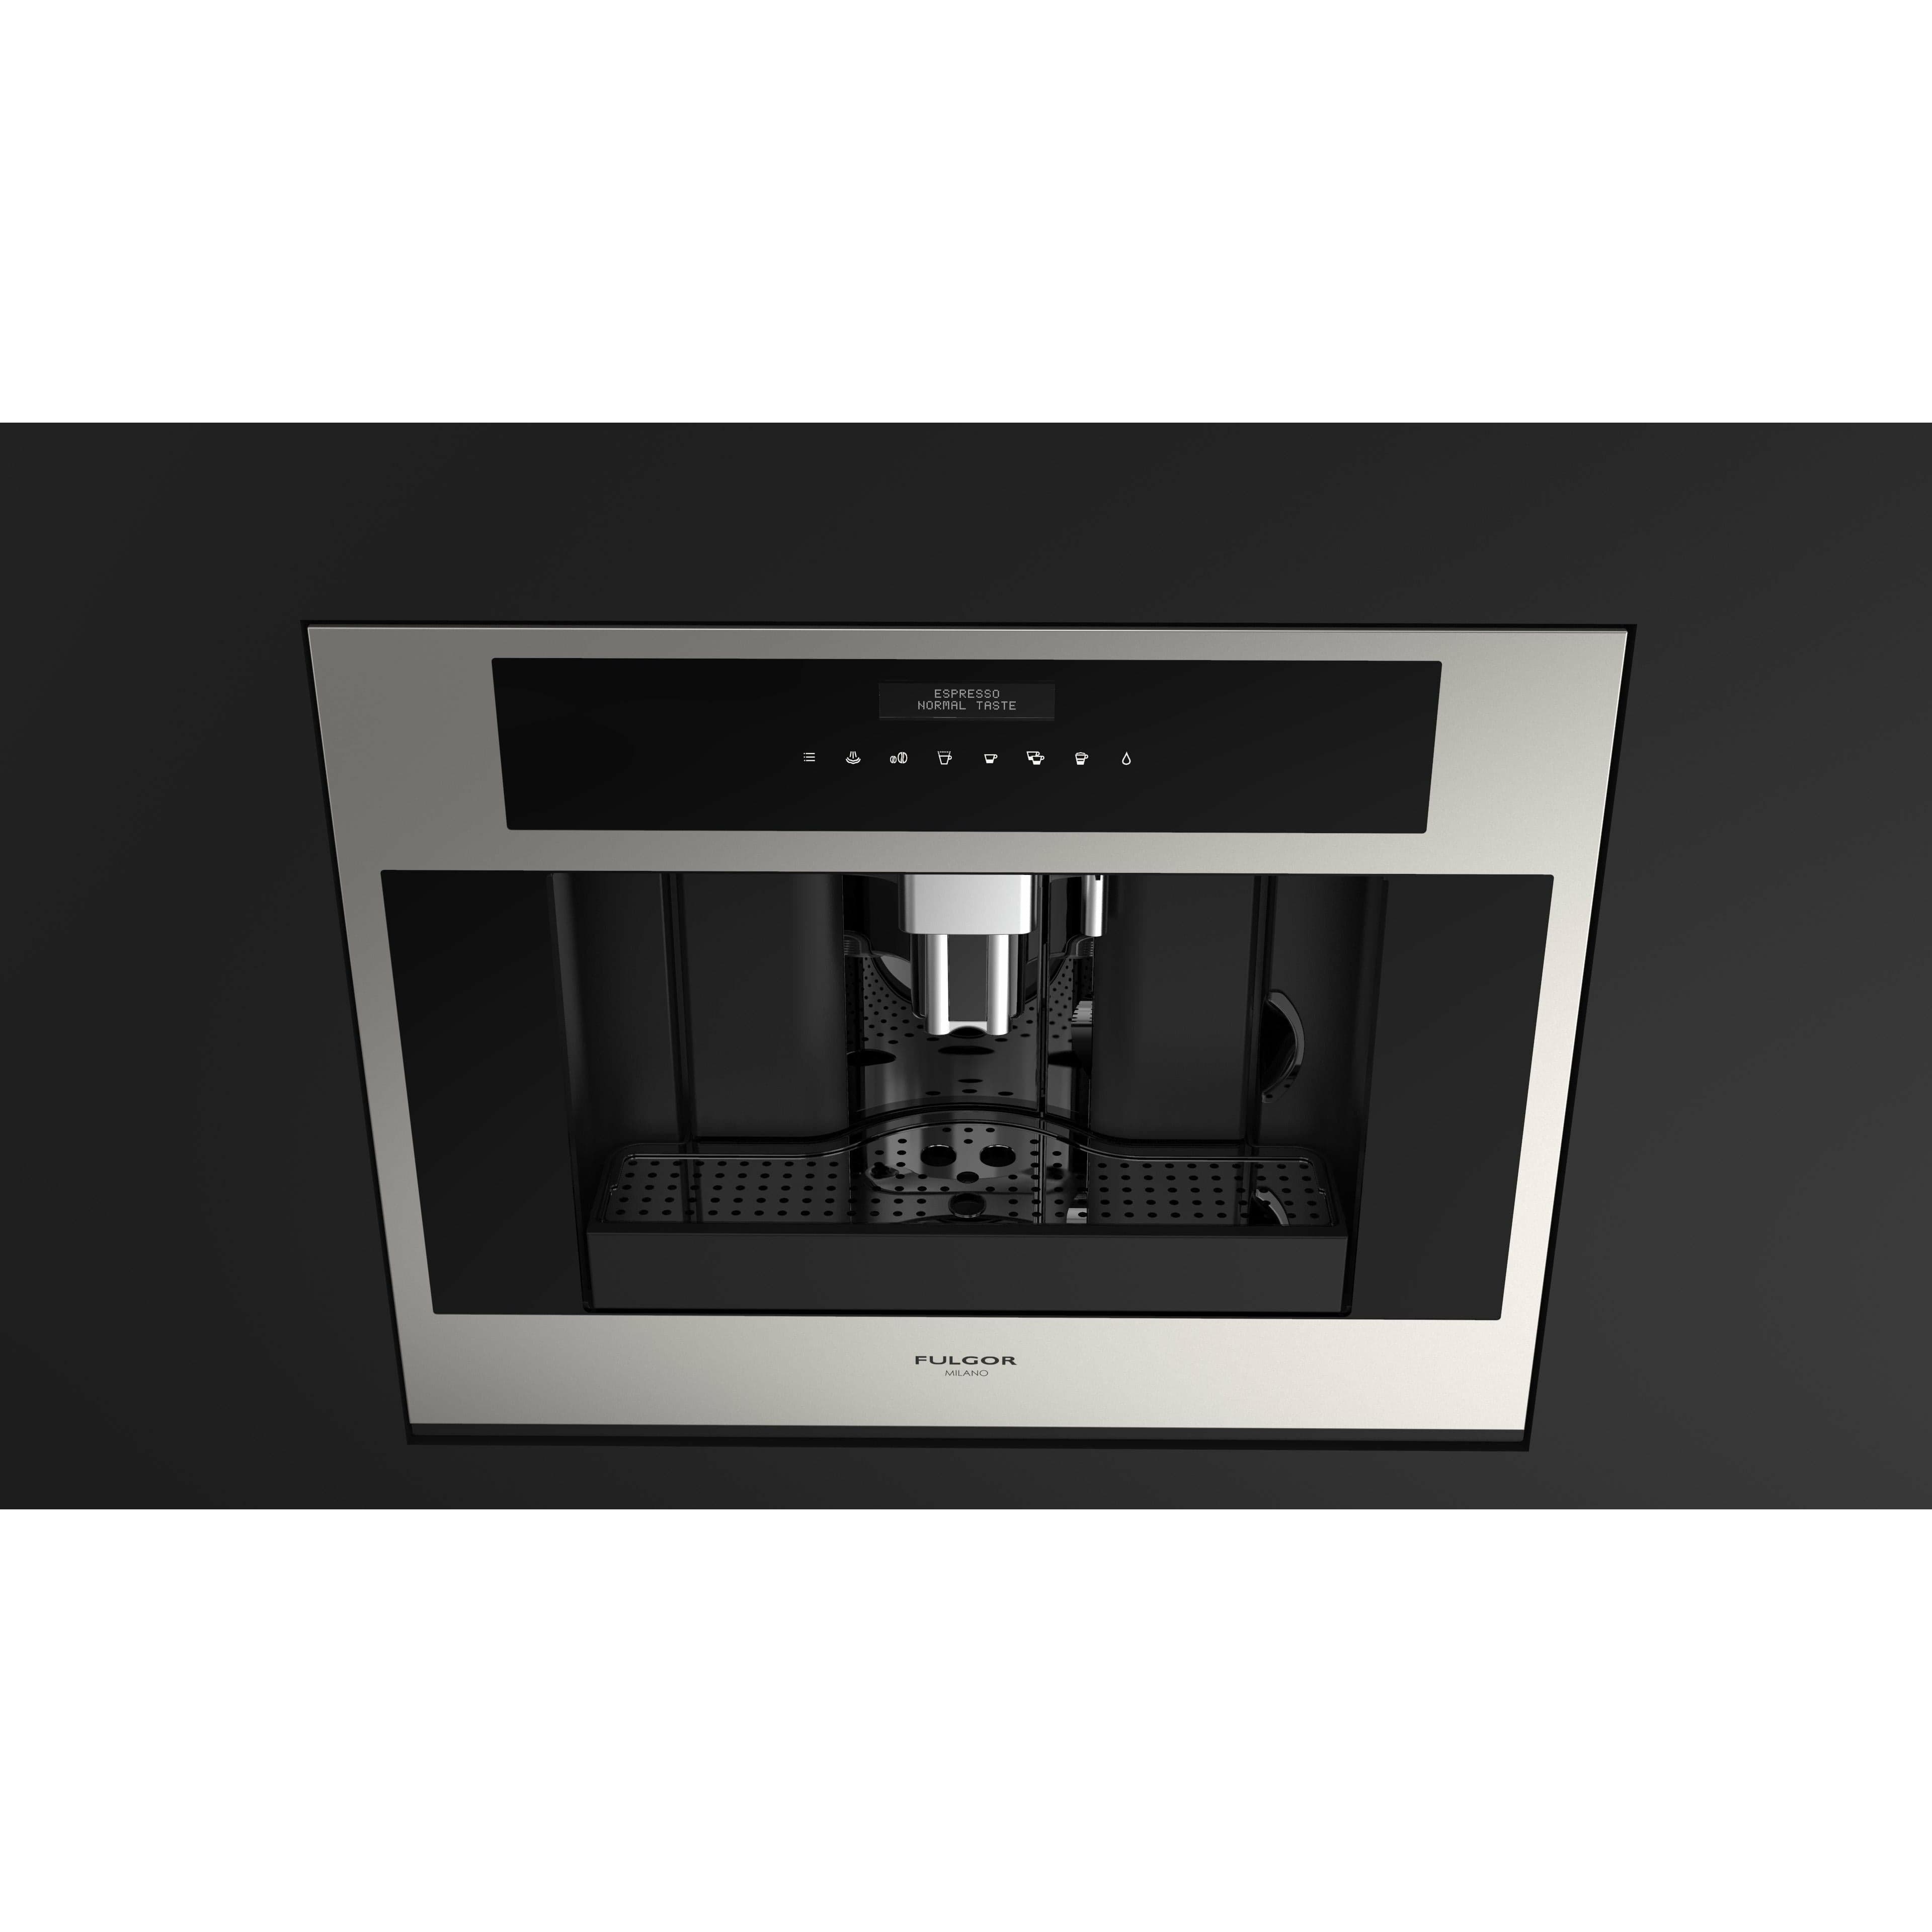 Fulgor Milano 24" Built-In Fully Automatic Coffee Machine, Stainless Steel - F7BC24S1 Kegerators F7BC24S1 Luxury Appliances Direct